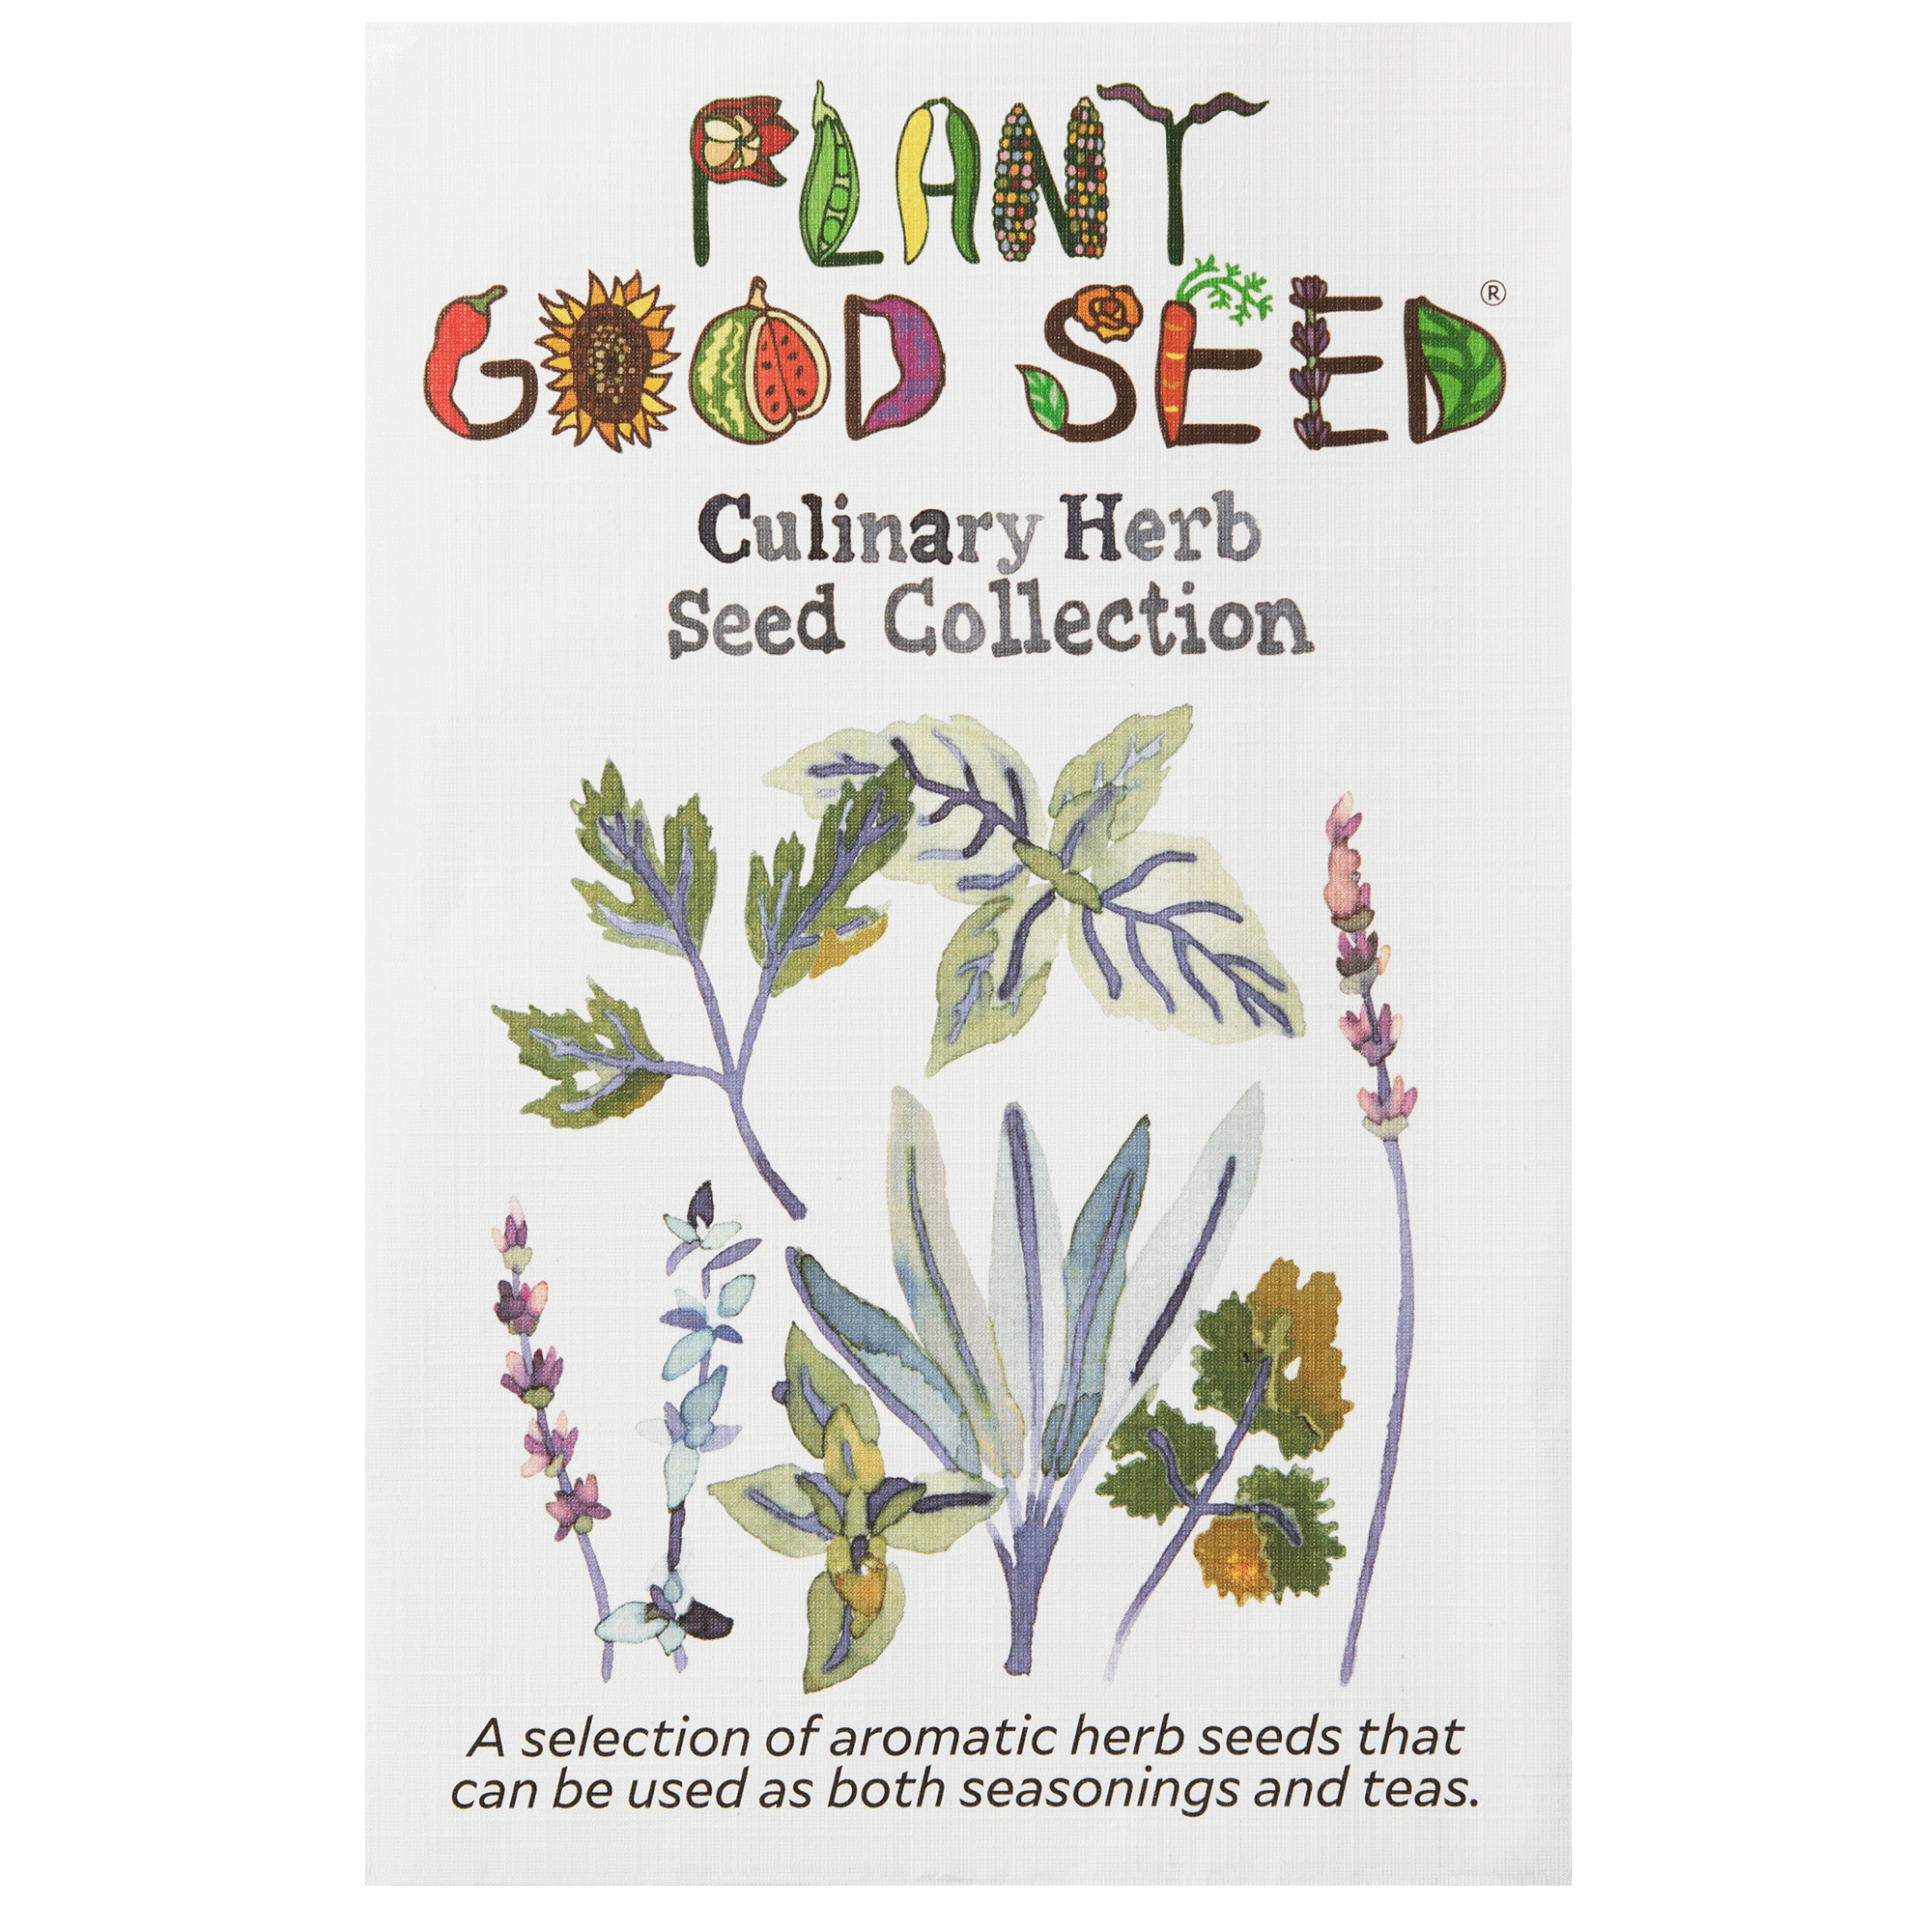 Seed Variety Collections